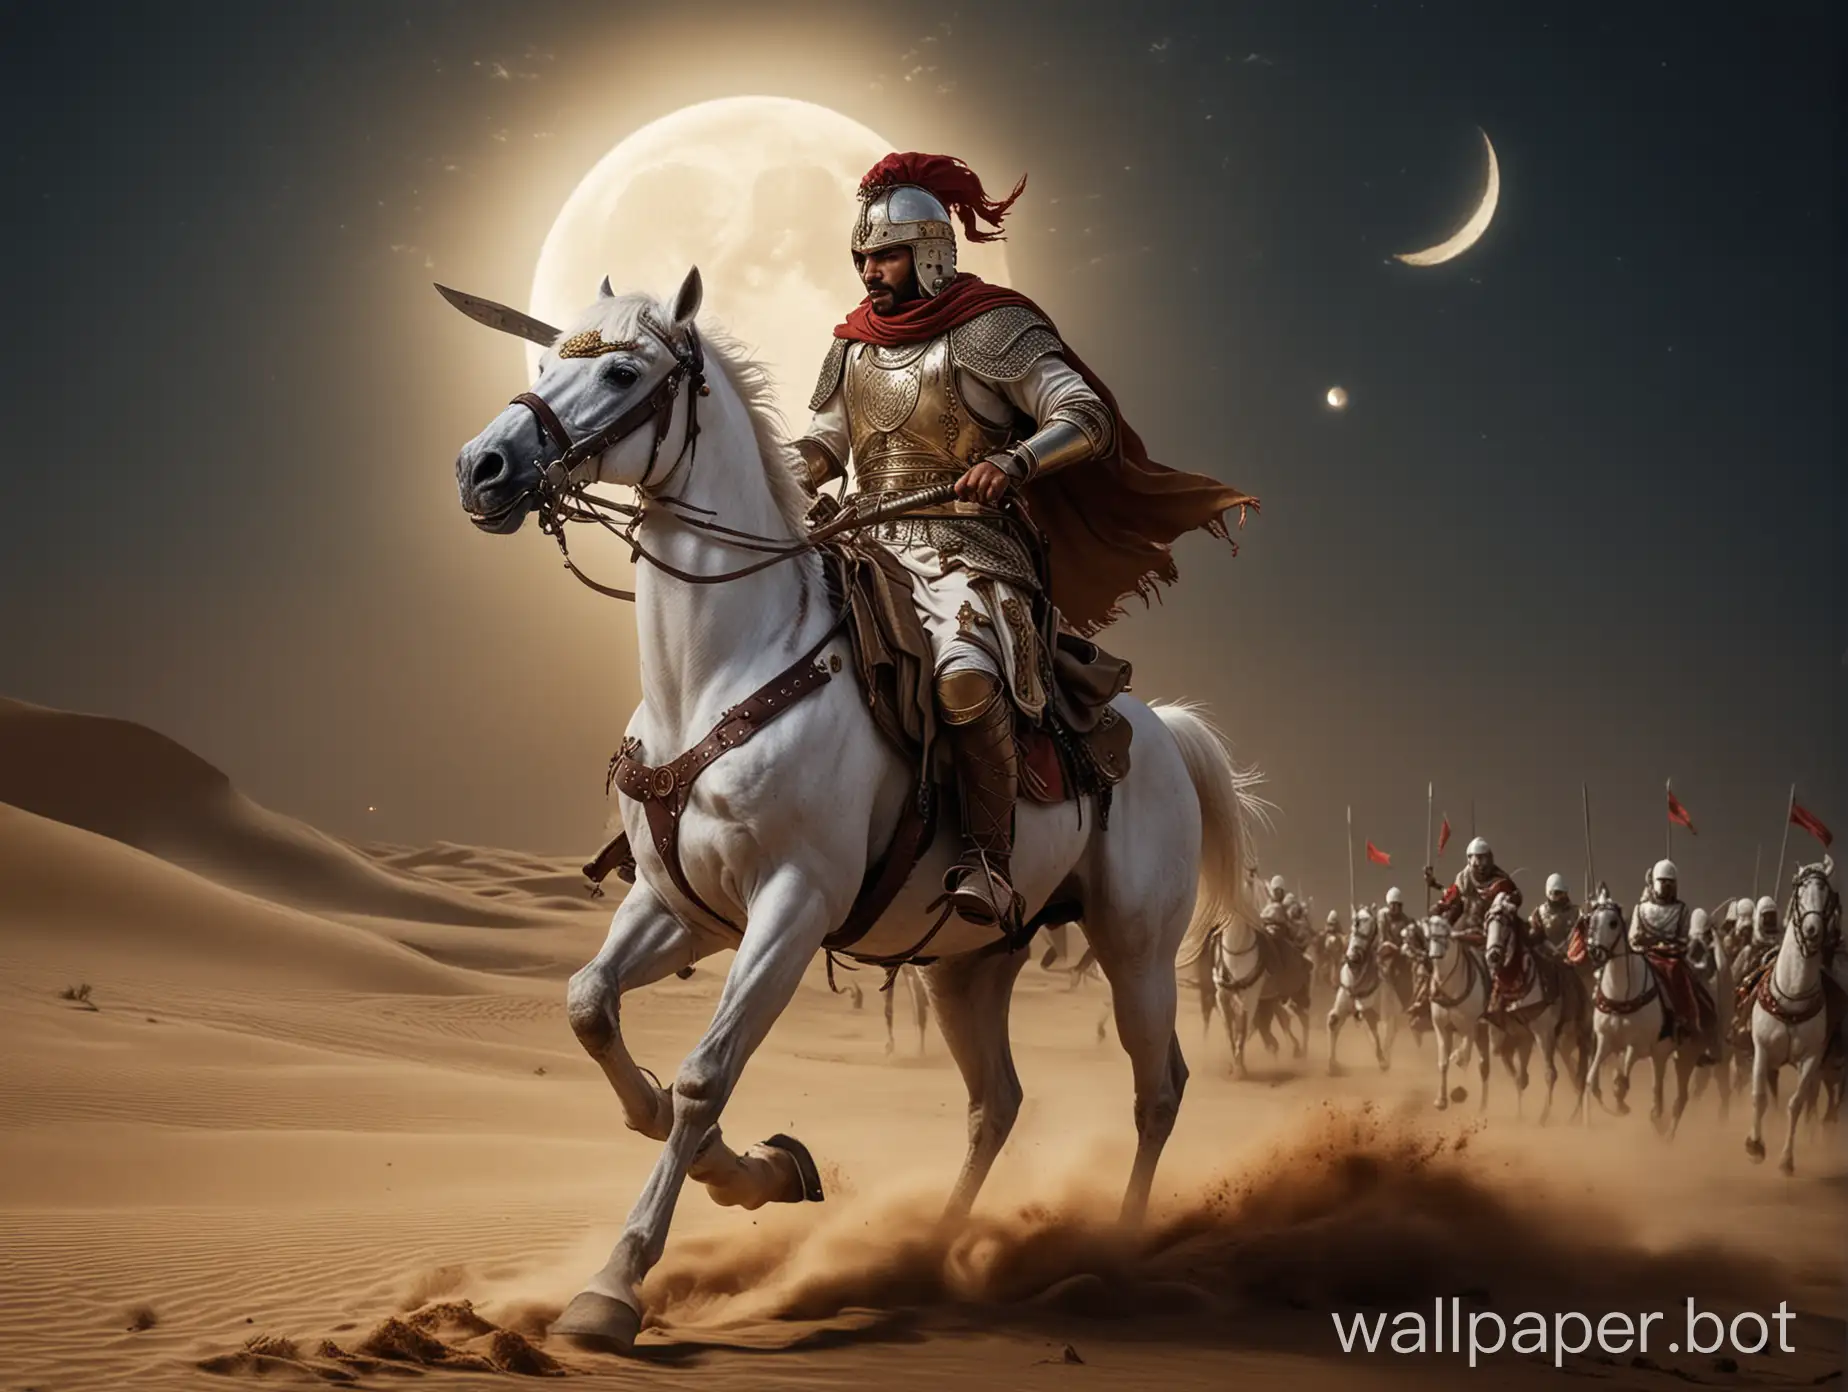 An Arab cavalry warlord on his white Arabian horse with leather armor and scimitar in his hand hitting the Roman enemy front row at night under the crescent moon on the dune while his army is running toward him to fight as well.